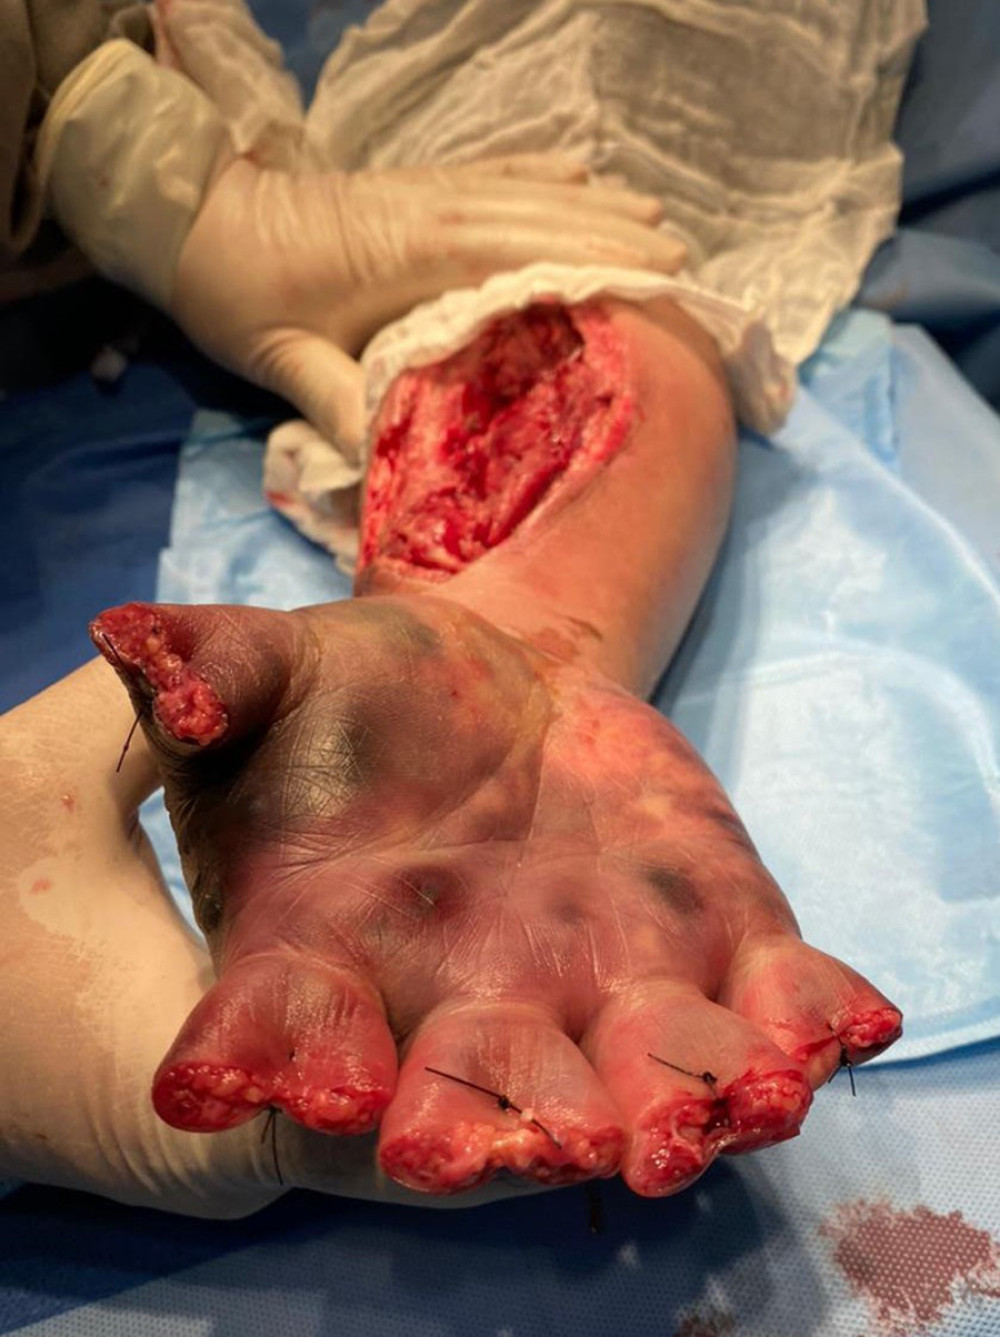 Debridement of dead tissue from previous fasciotomy and finger amputation.